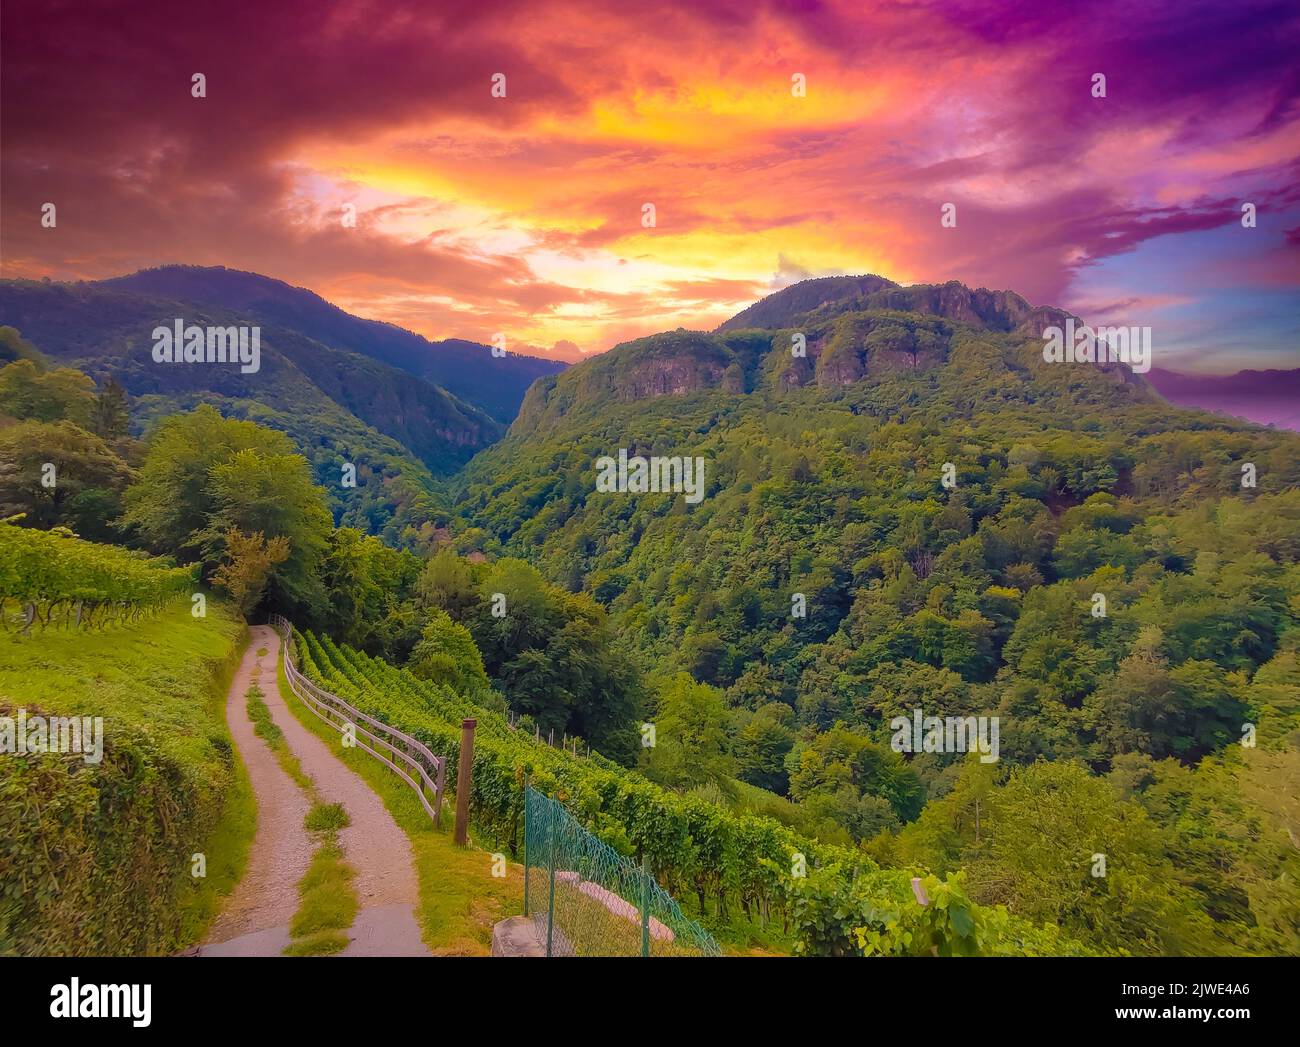 Landscape of mountains at sunset in summer with dramatic sky Stock Photo